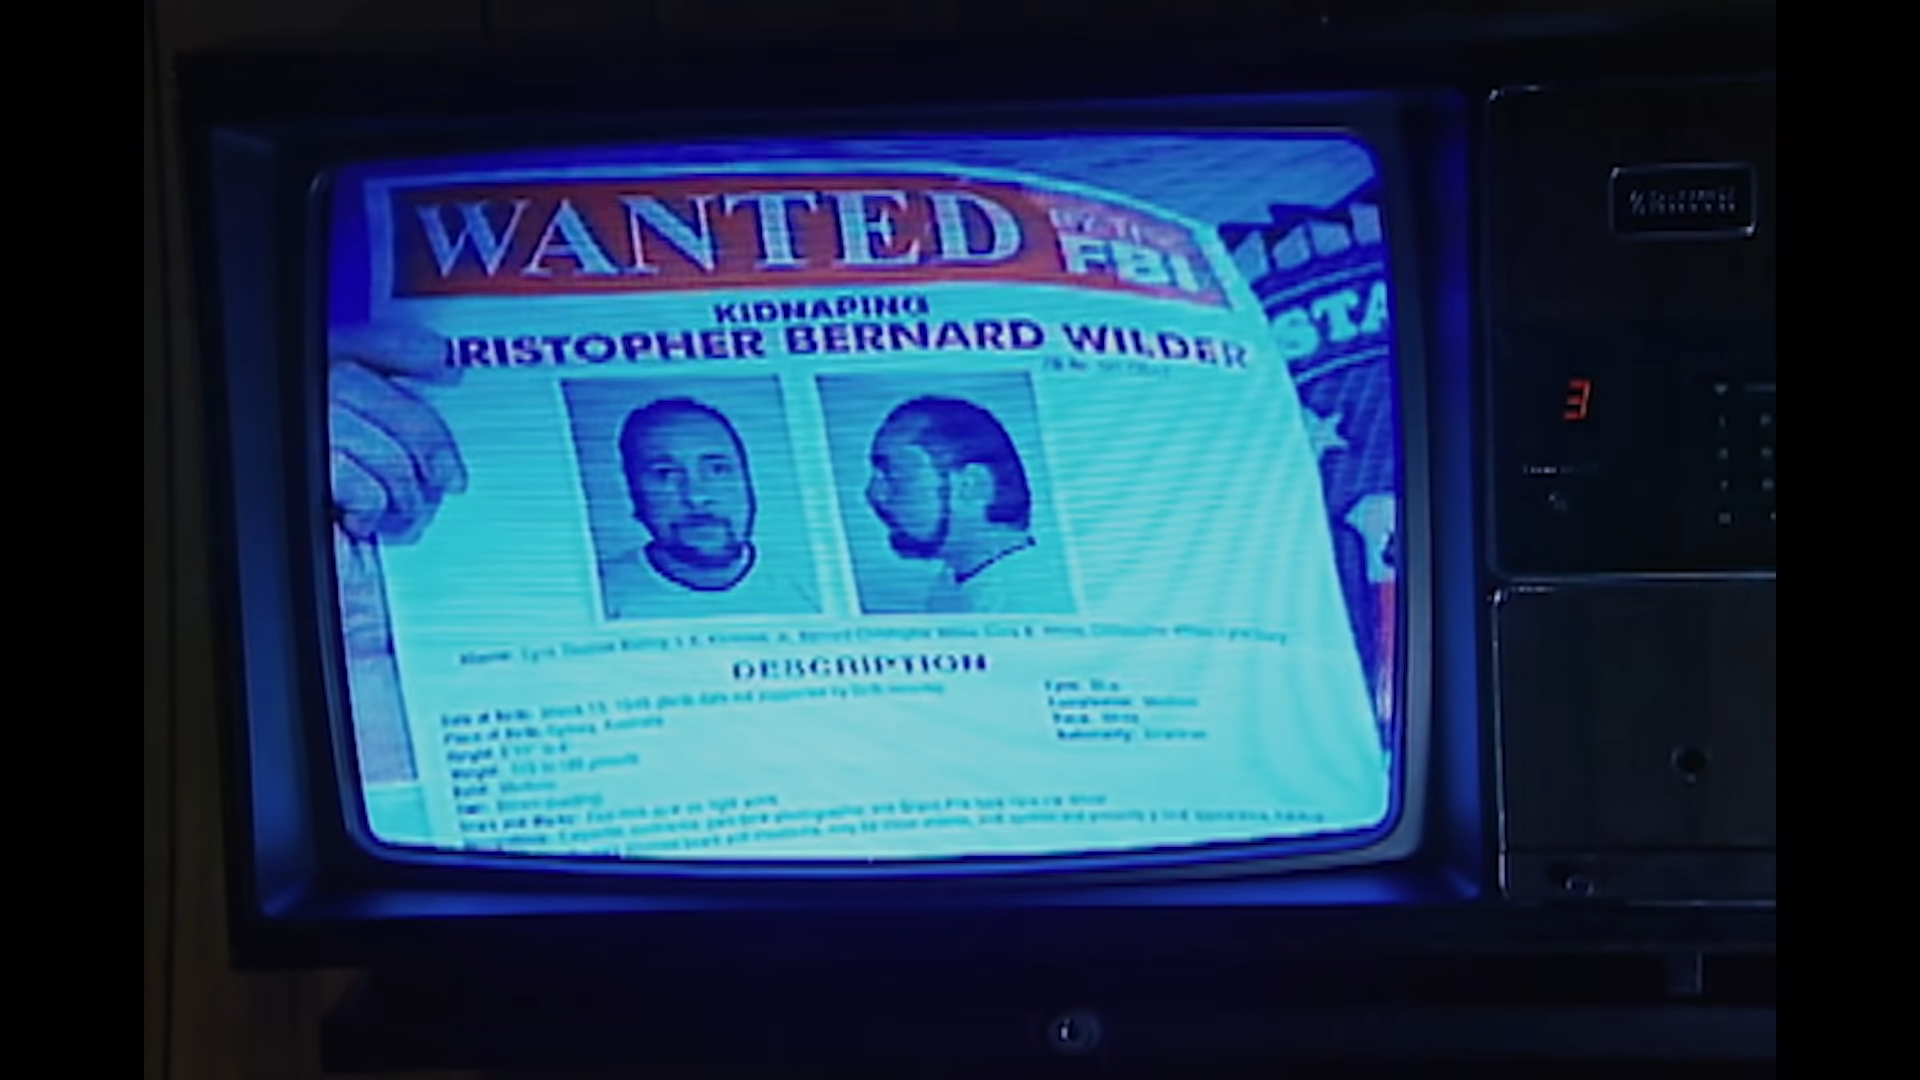 Wanted poster on a TV screen showing photographs and information for Christopher Bernard Wilder